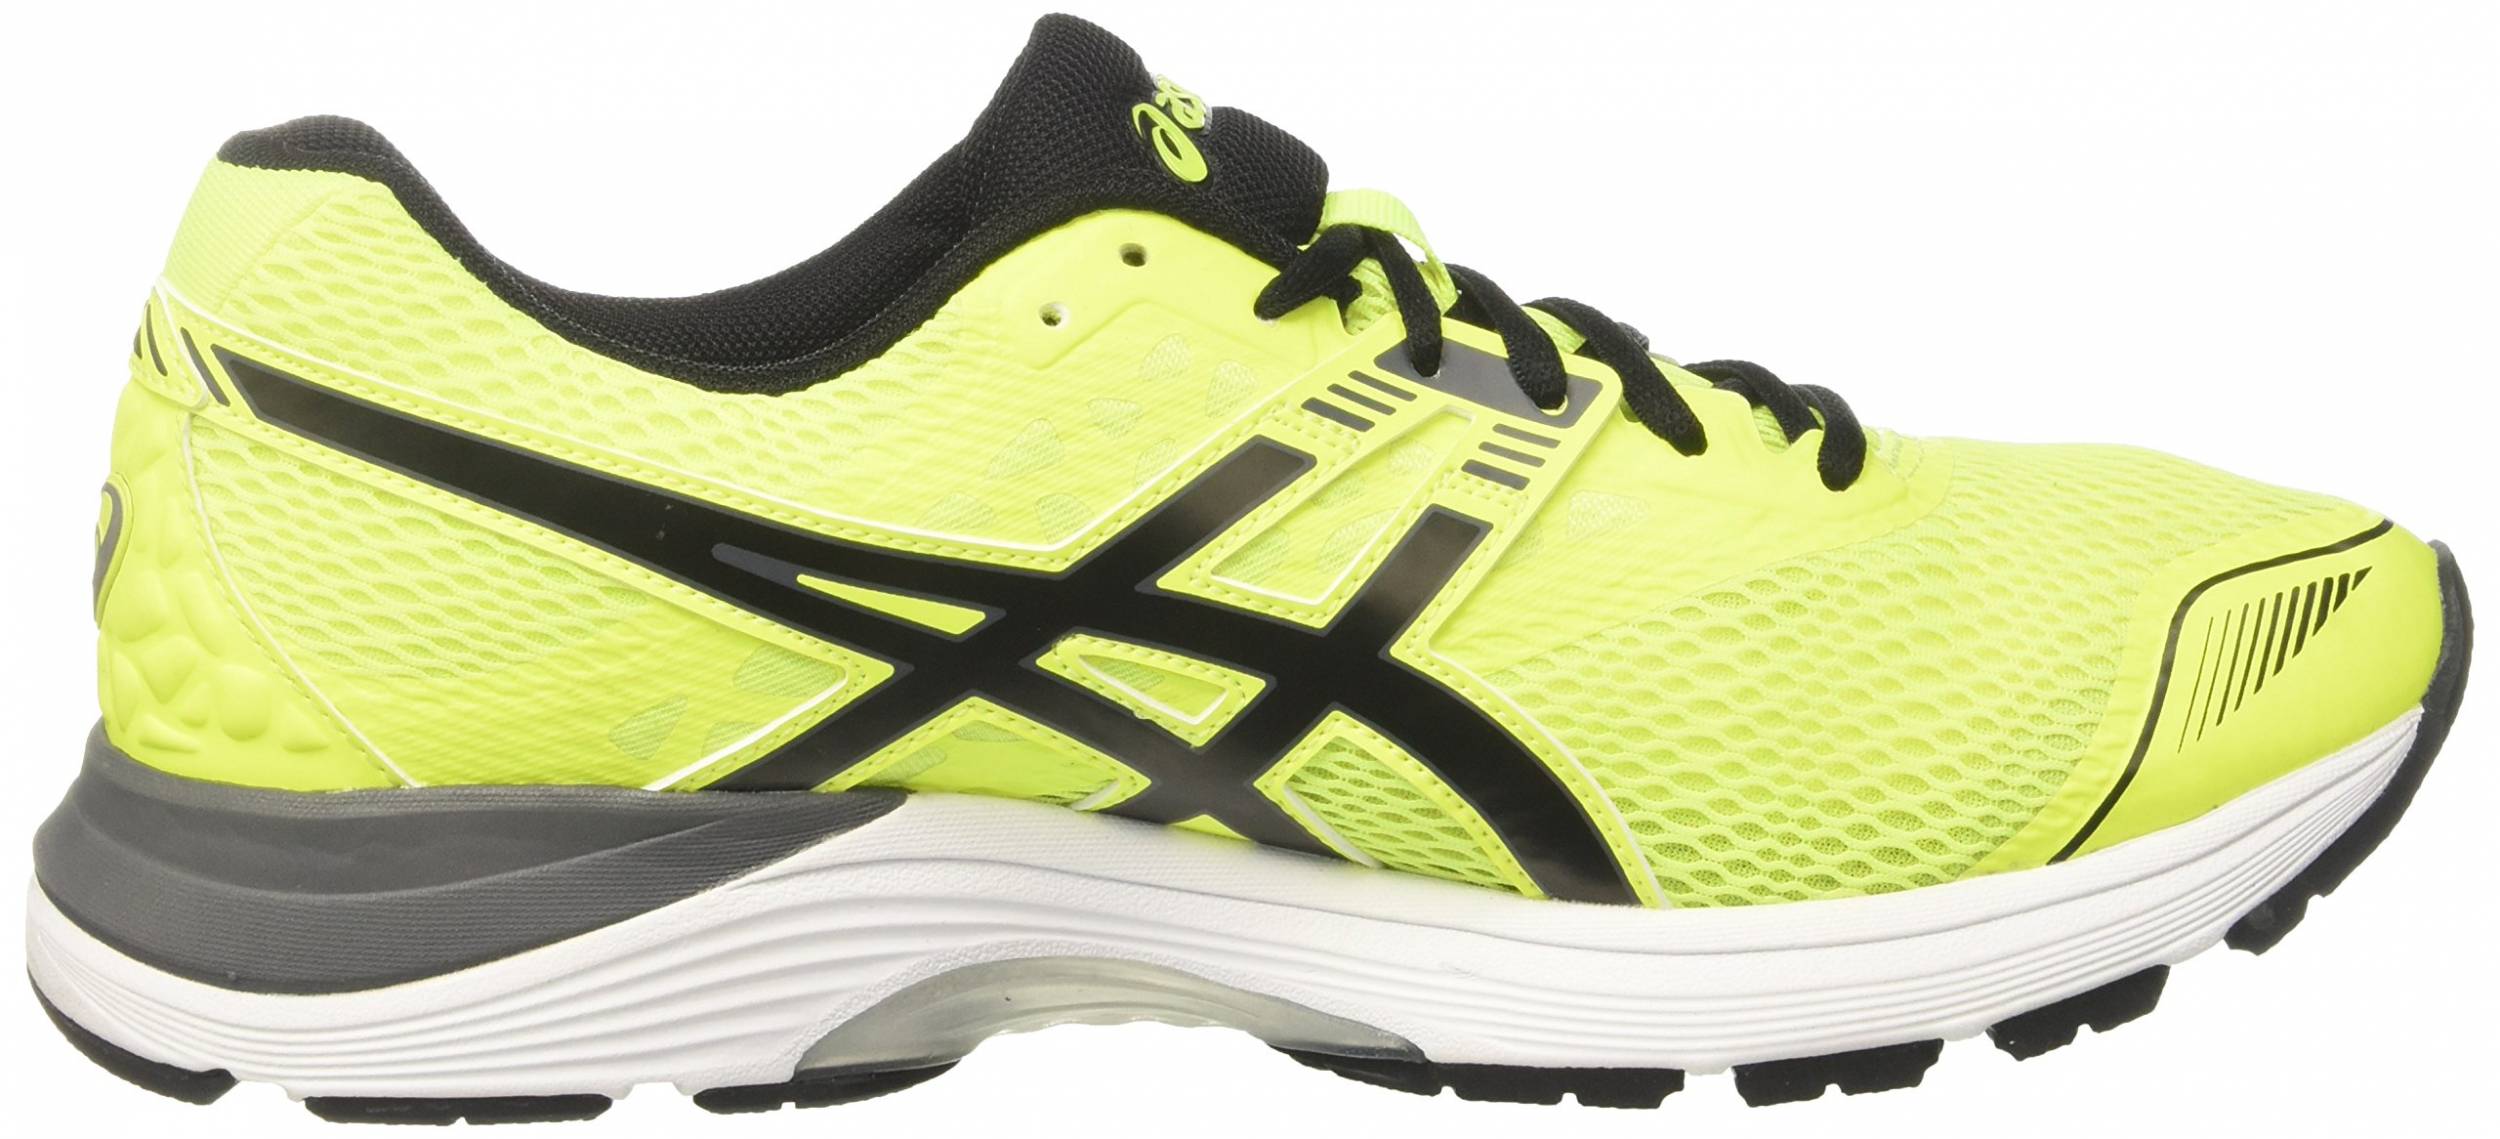 asics pulse 9 review